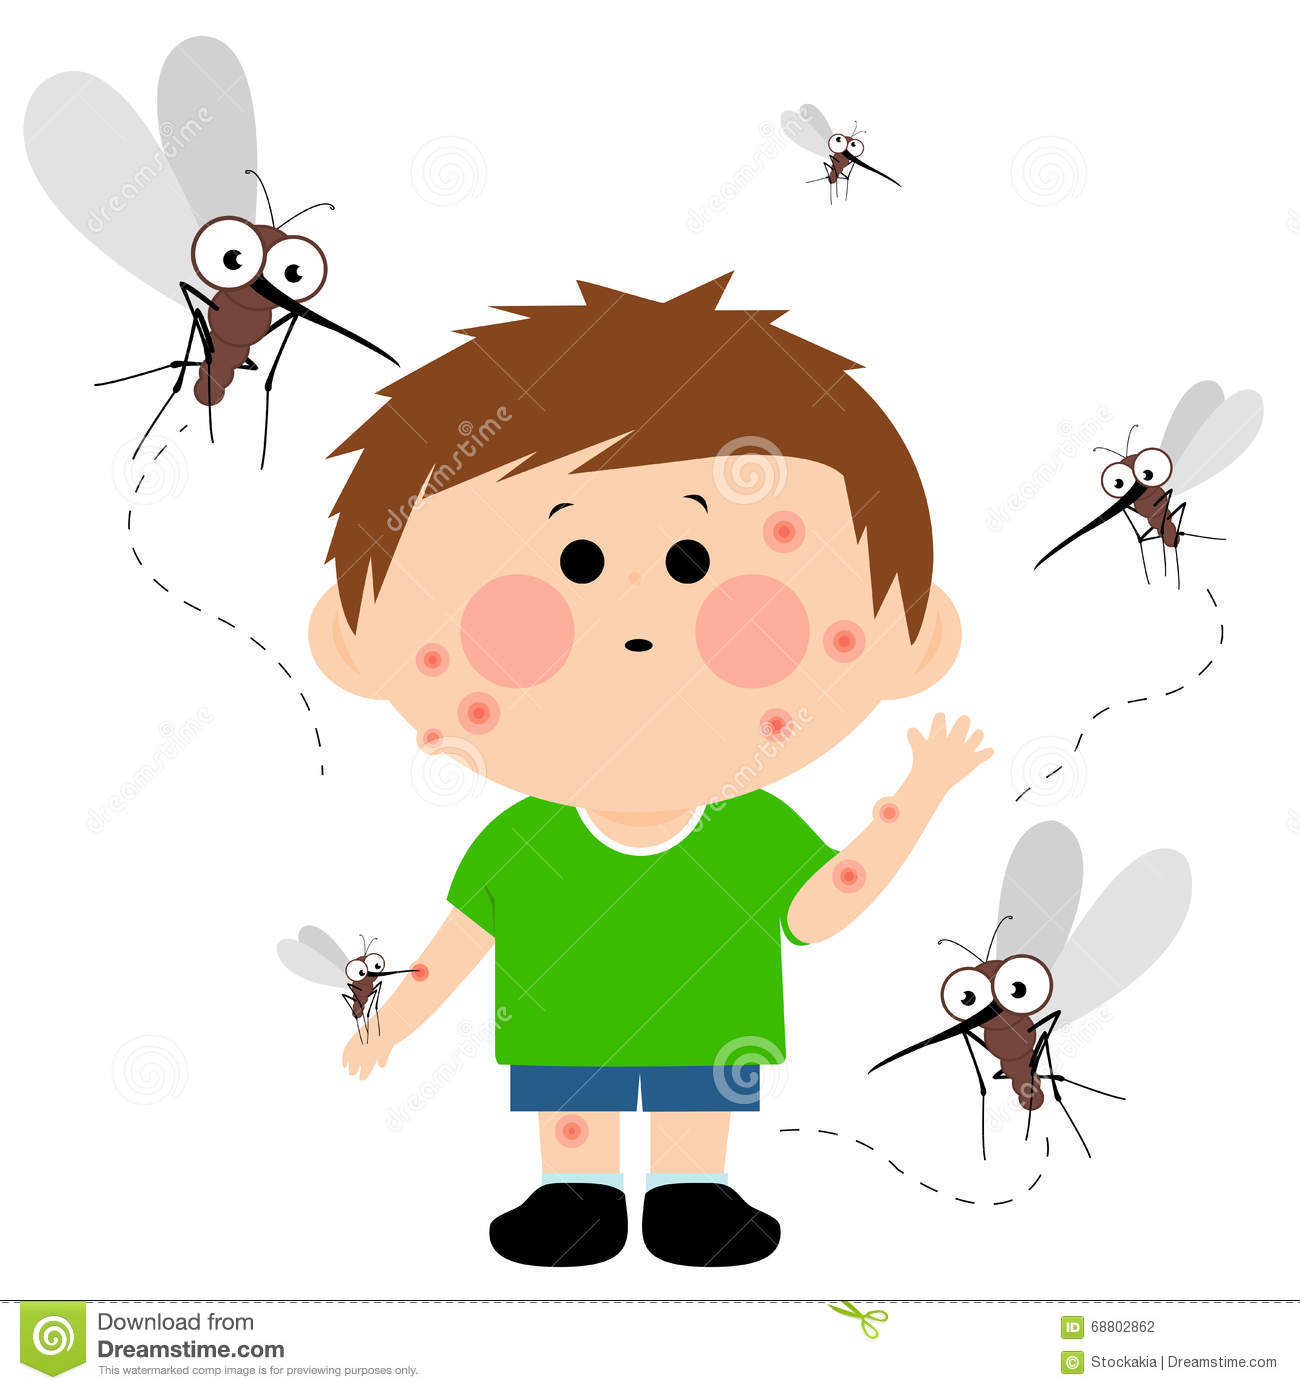 Painful bite clipart - Clipground